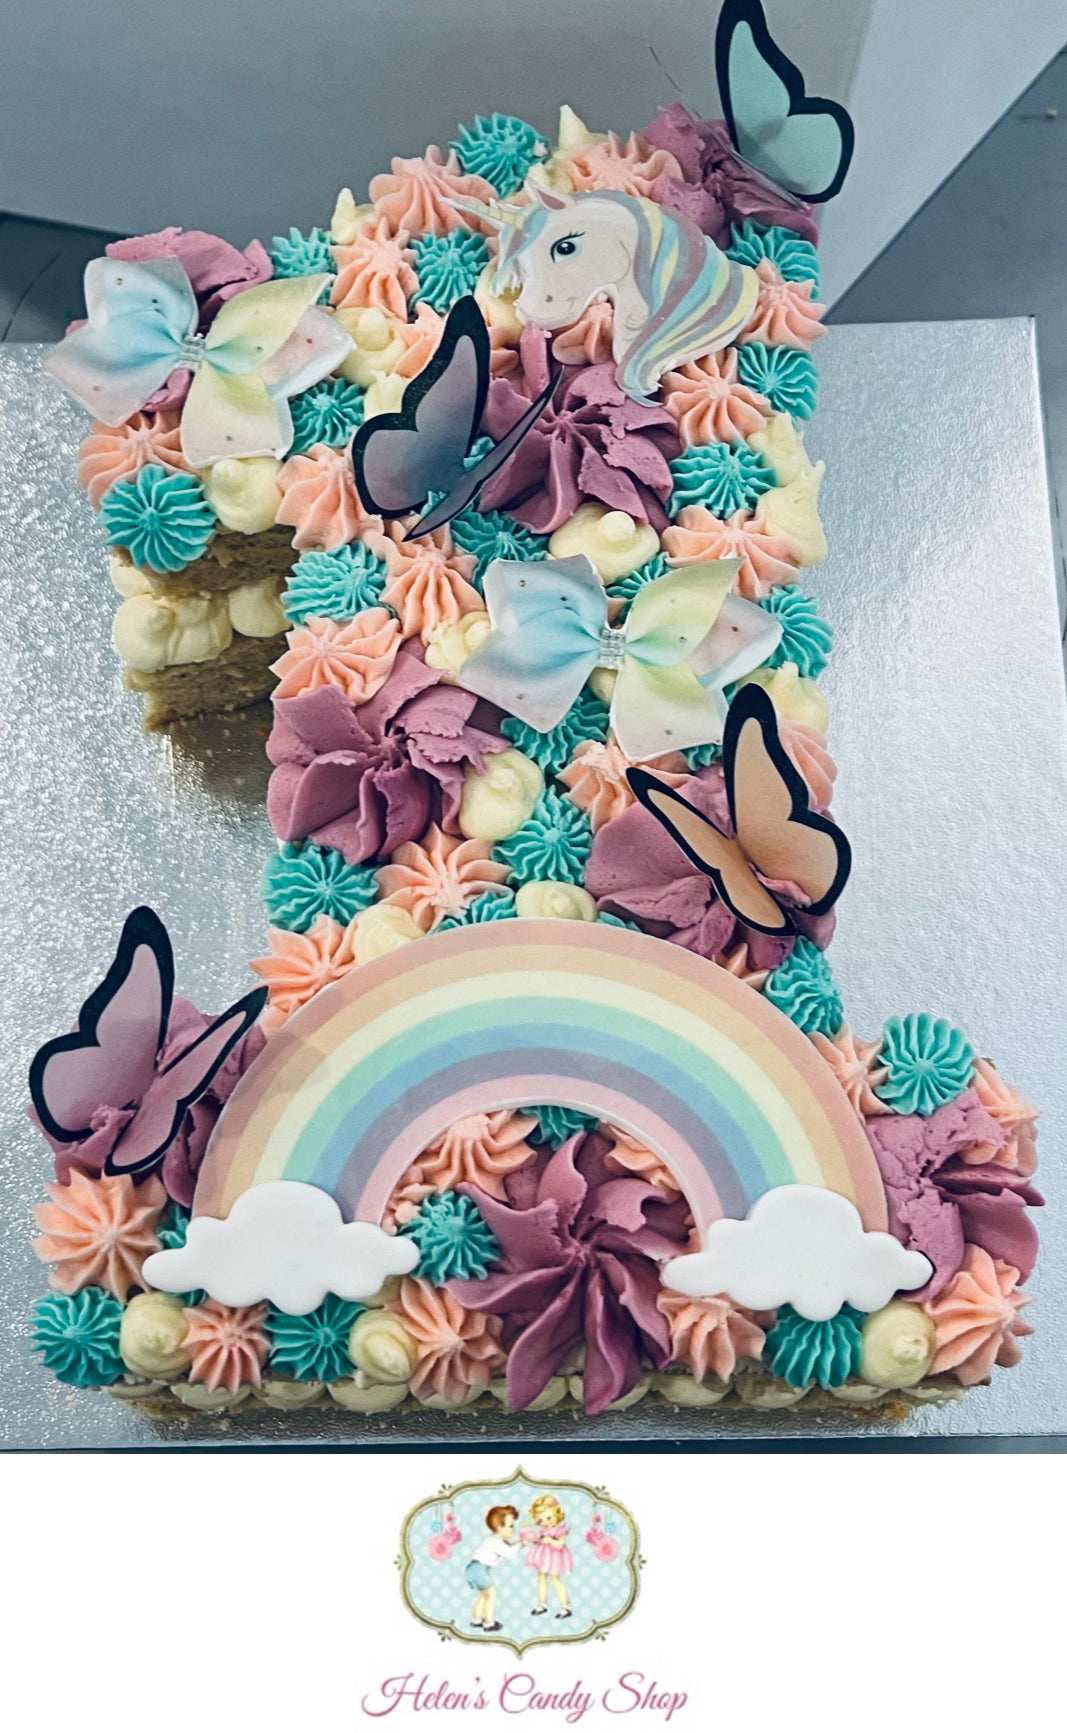 Unicorn, Bees, Butterfly & Fairy Themed Celebration Cakes